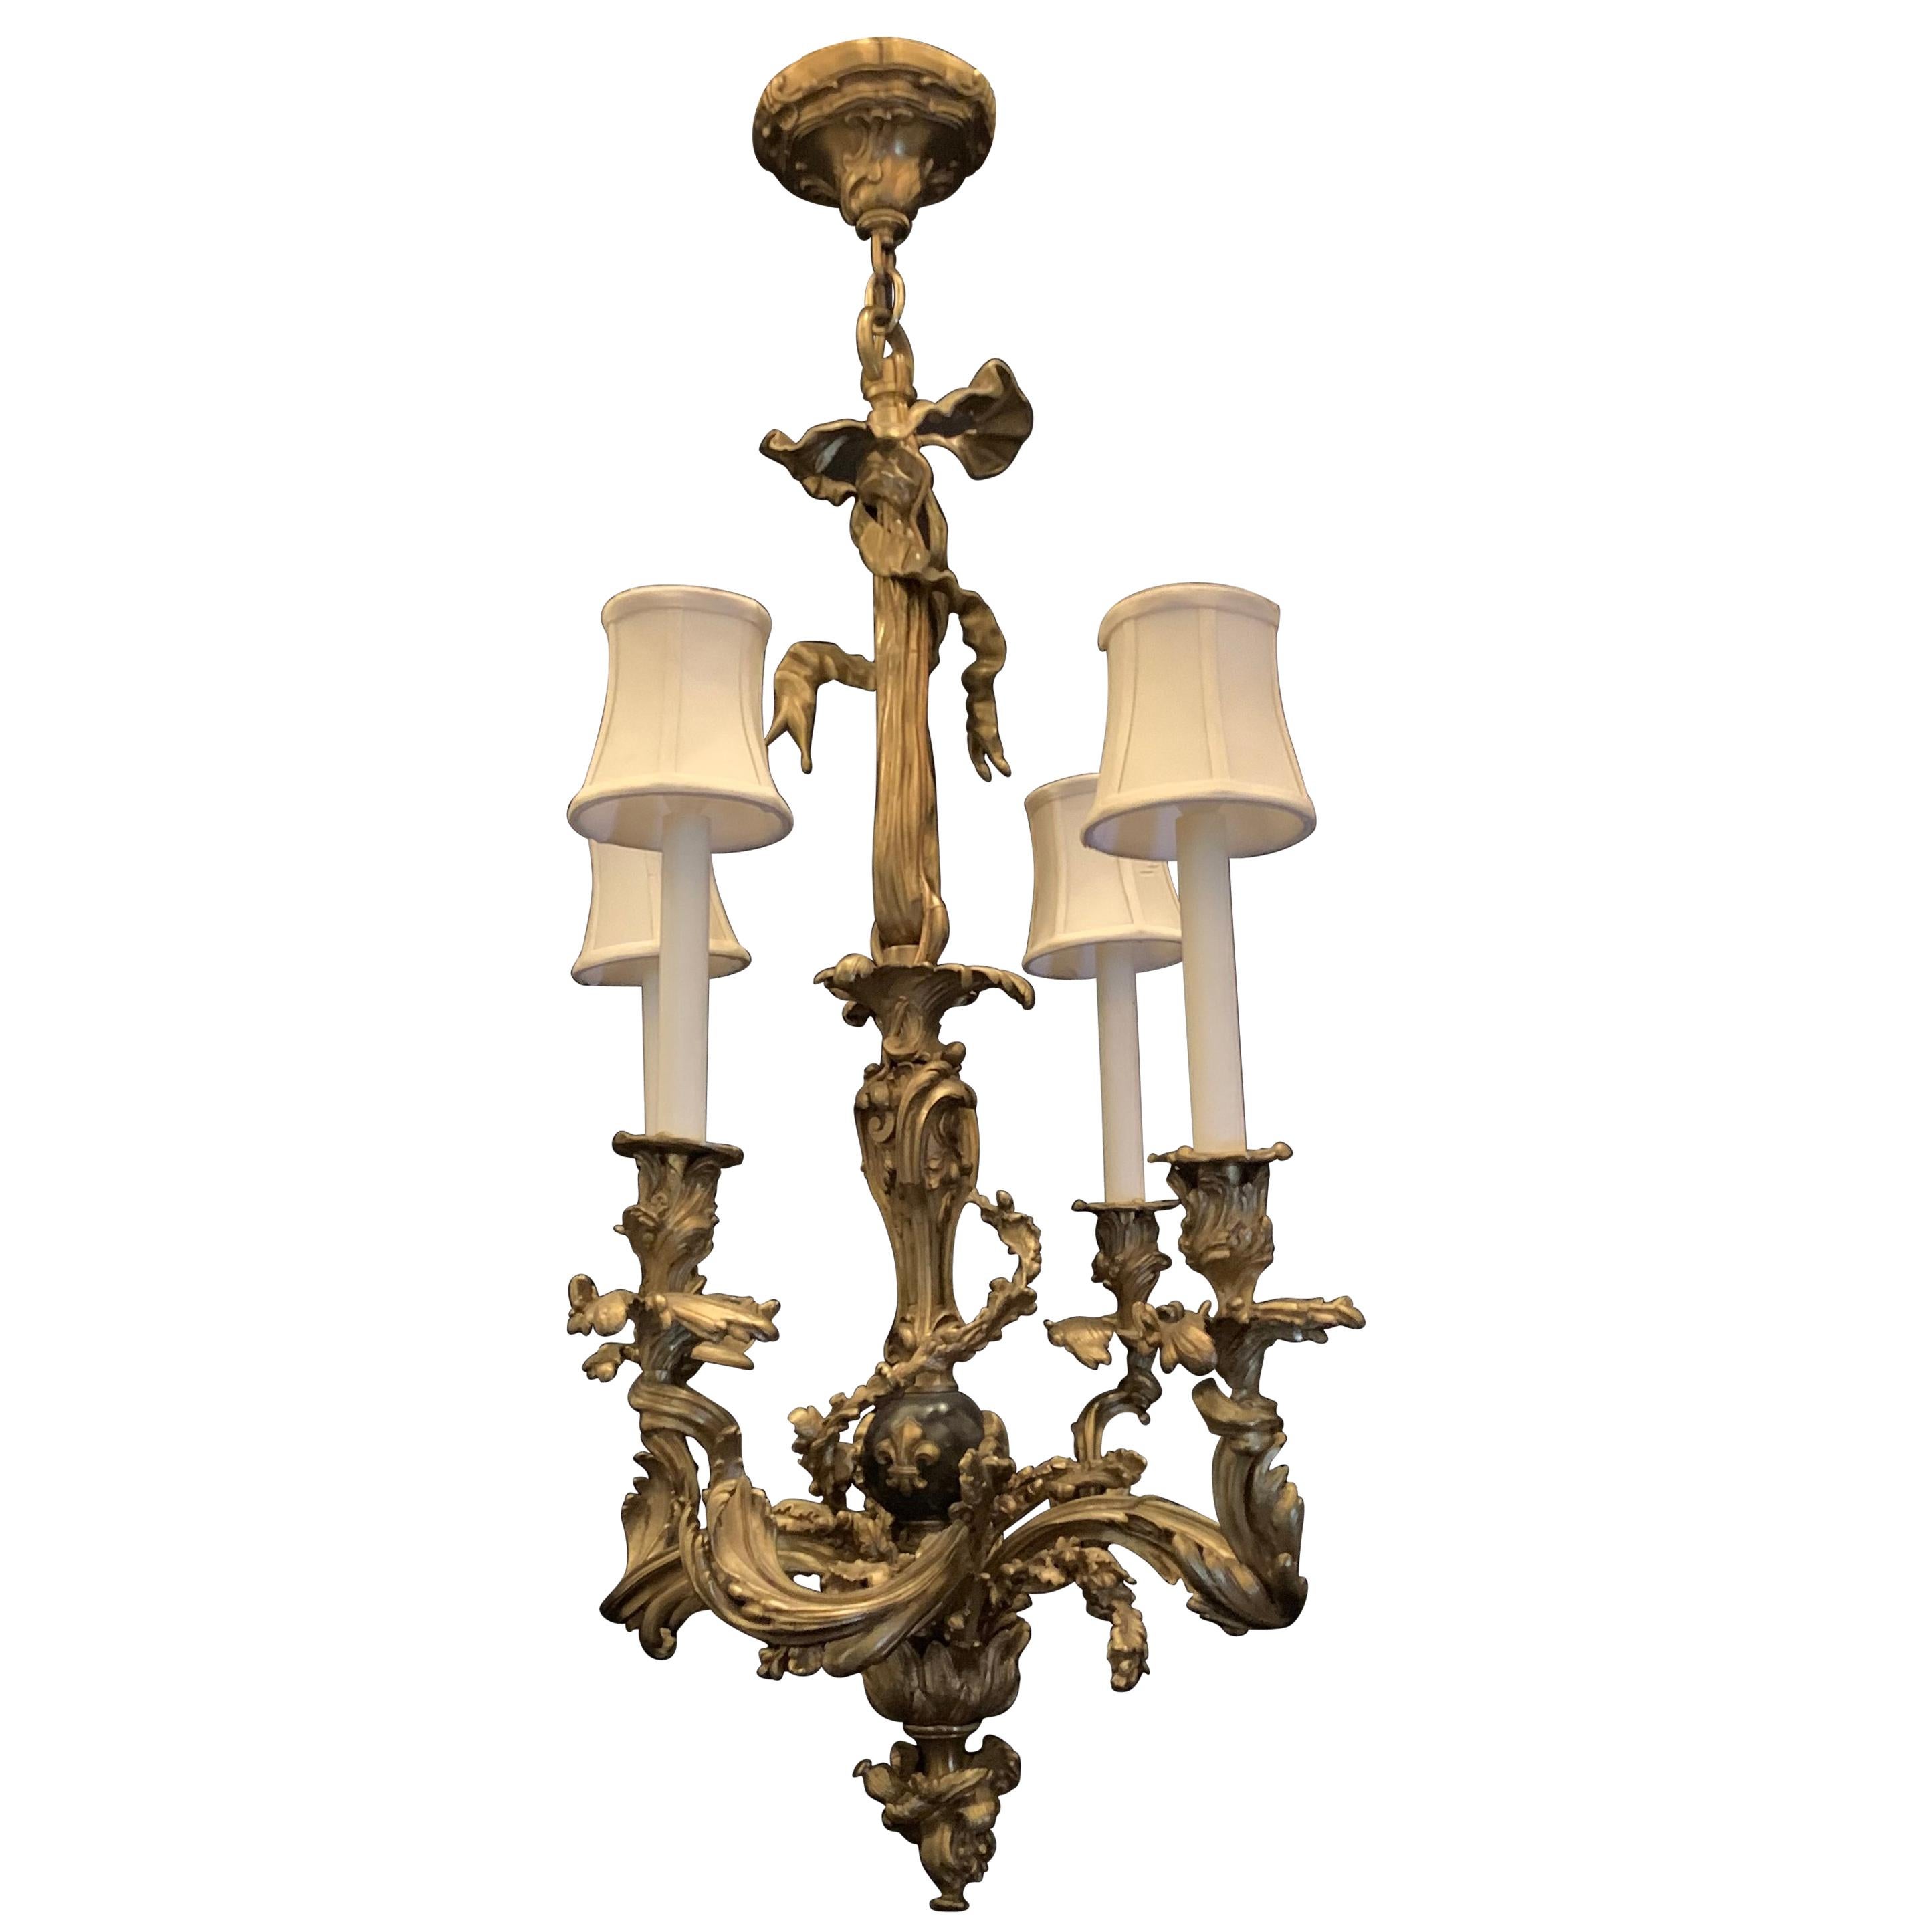 Wonderful French Neoclassical Bronze Patinated Bow Tassle Roccoco Chandelier For Sale